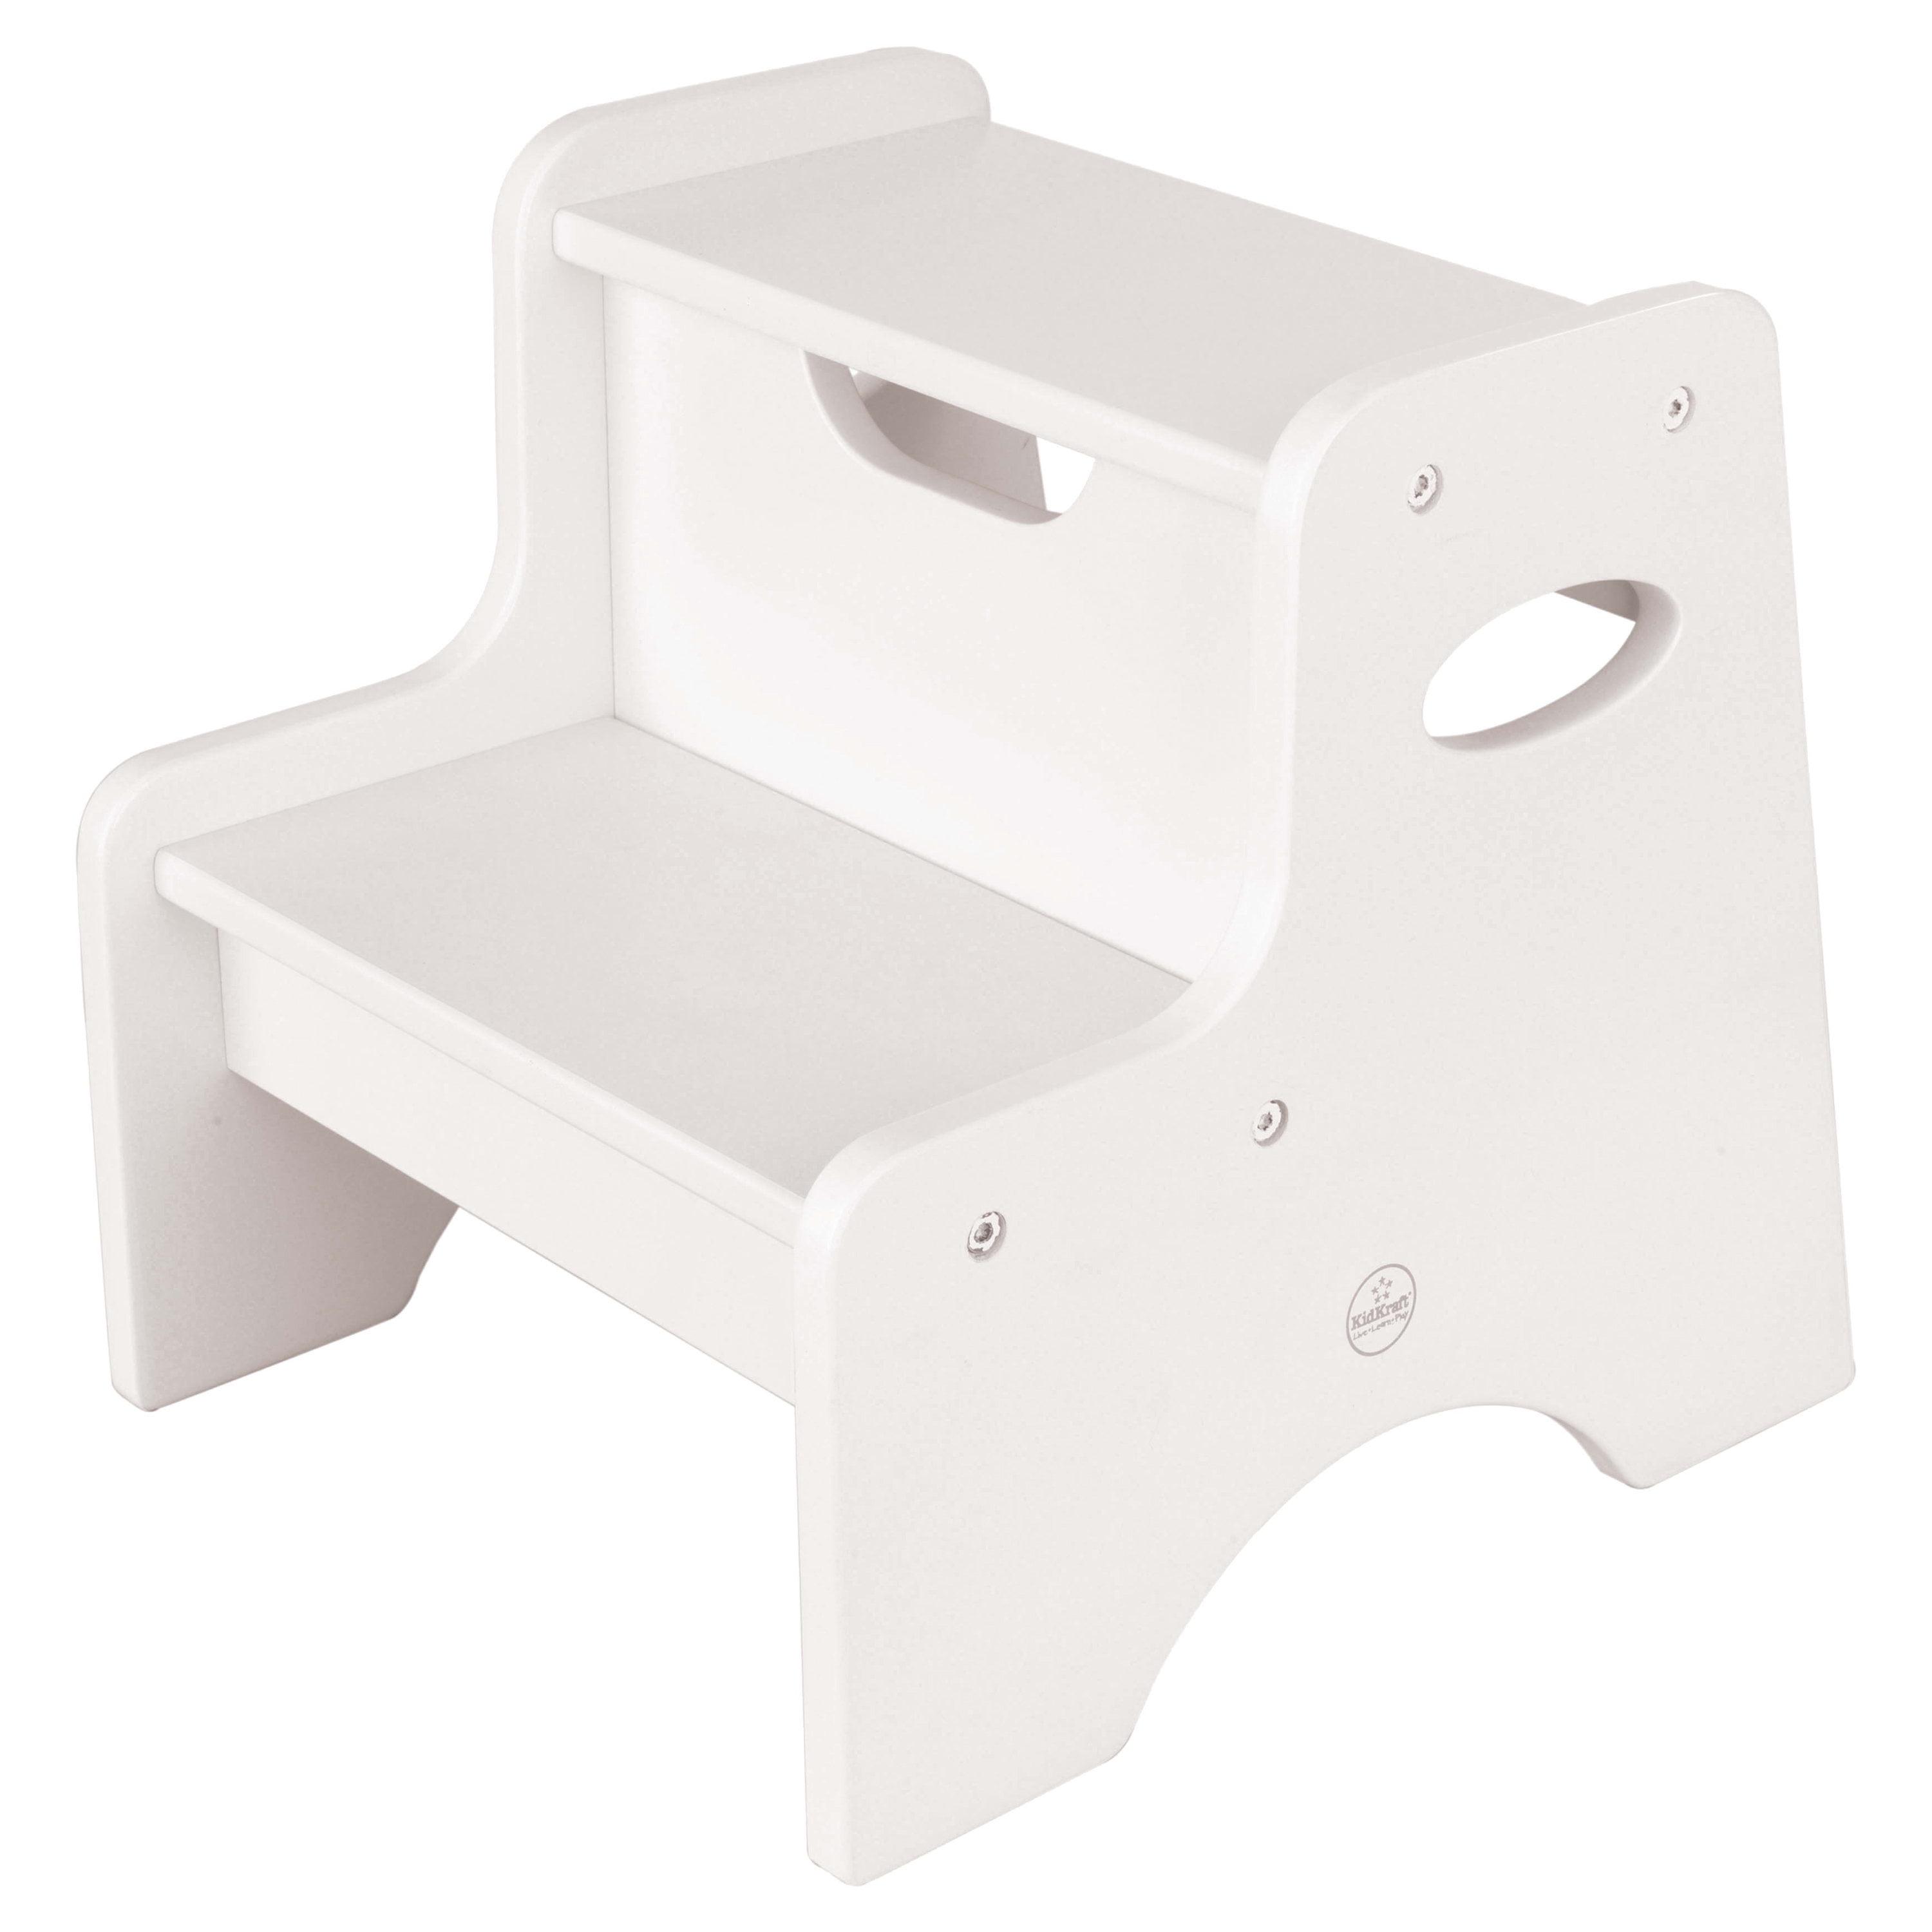 KidKraft Classic White Wooden Two-Step Children's Stool with Handles